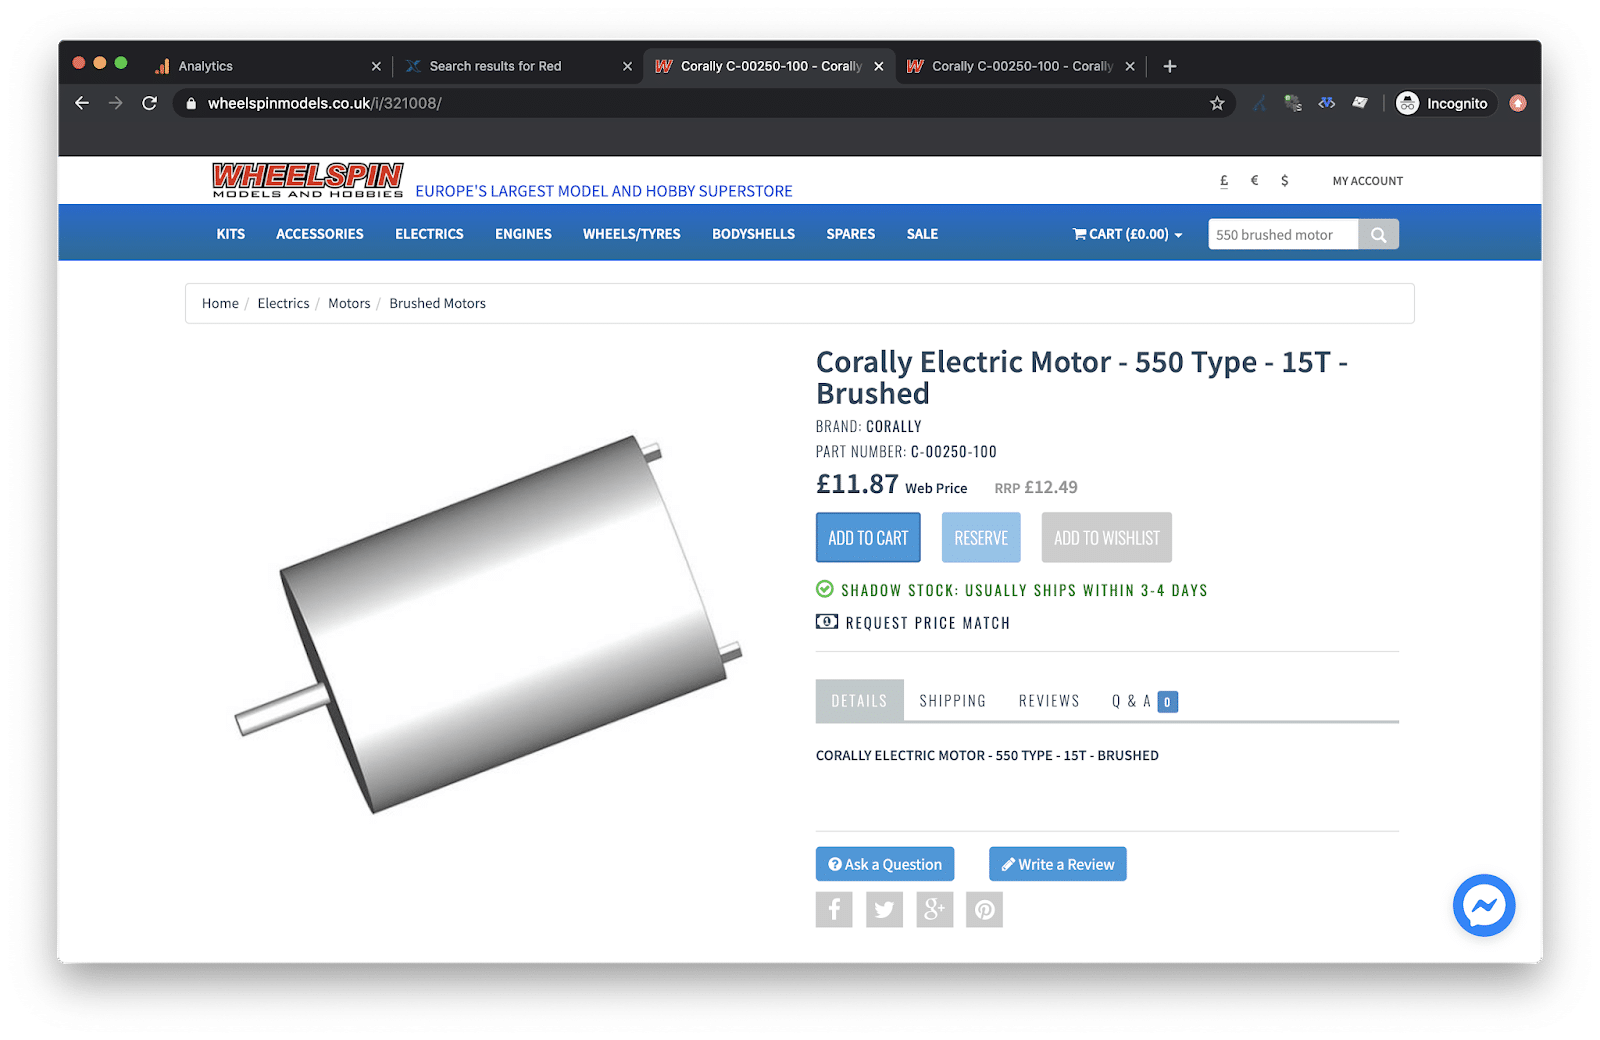 A generic brand motor is in stock